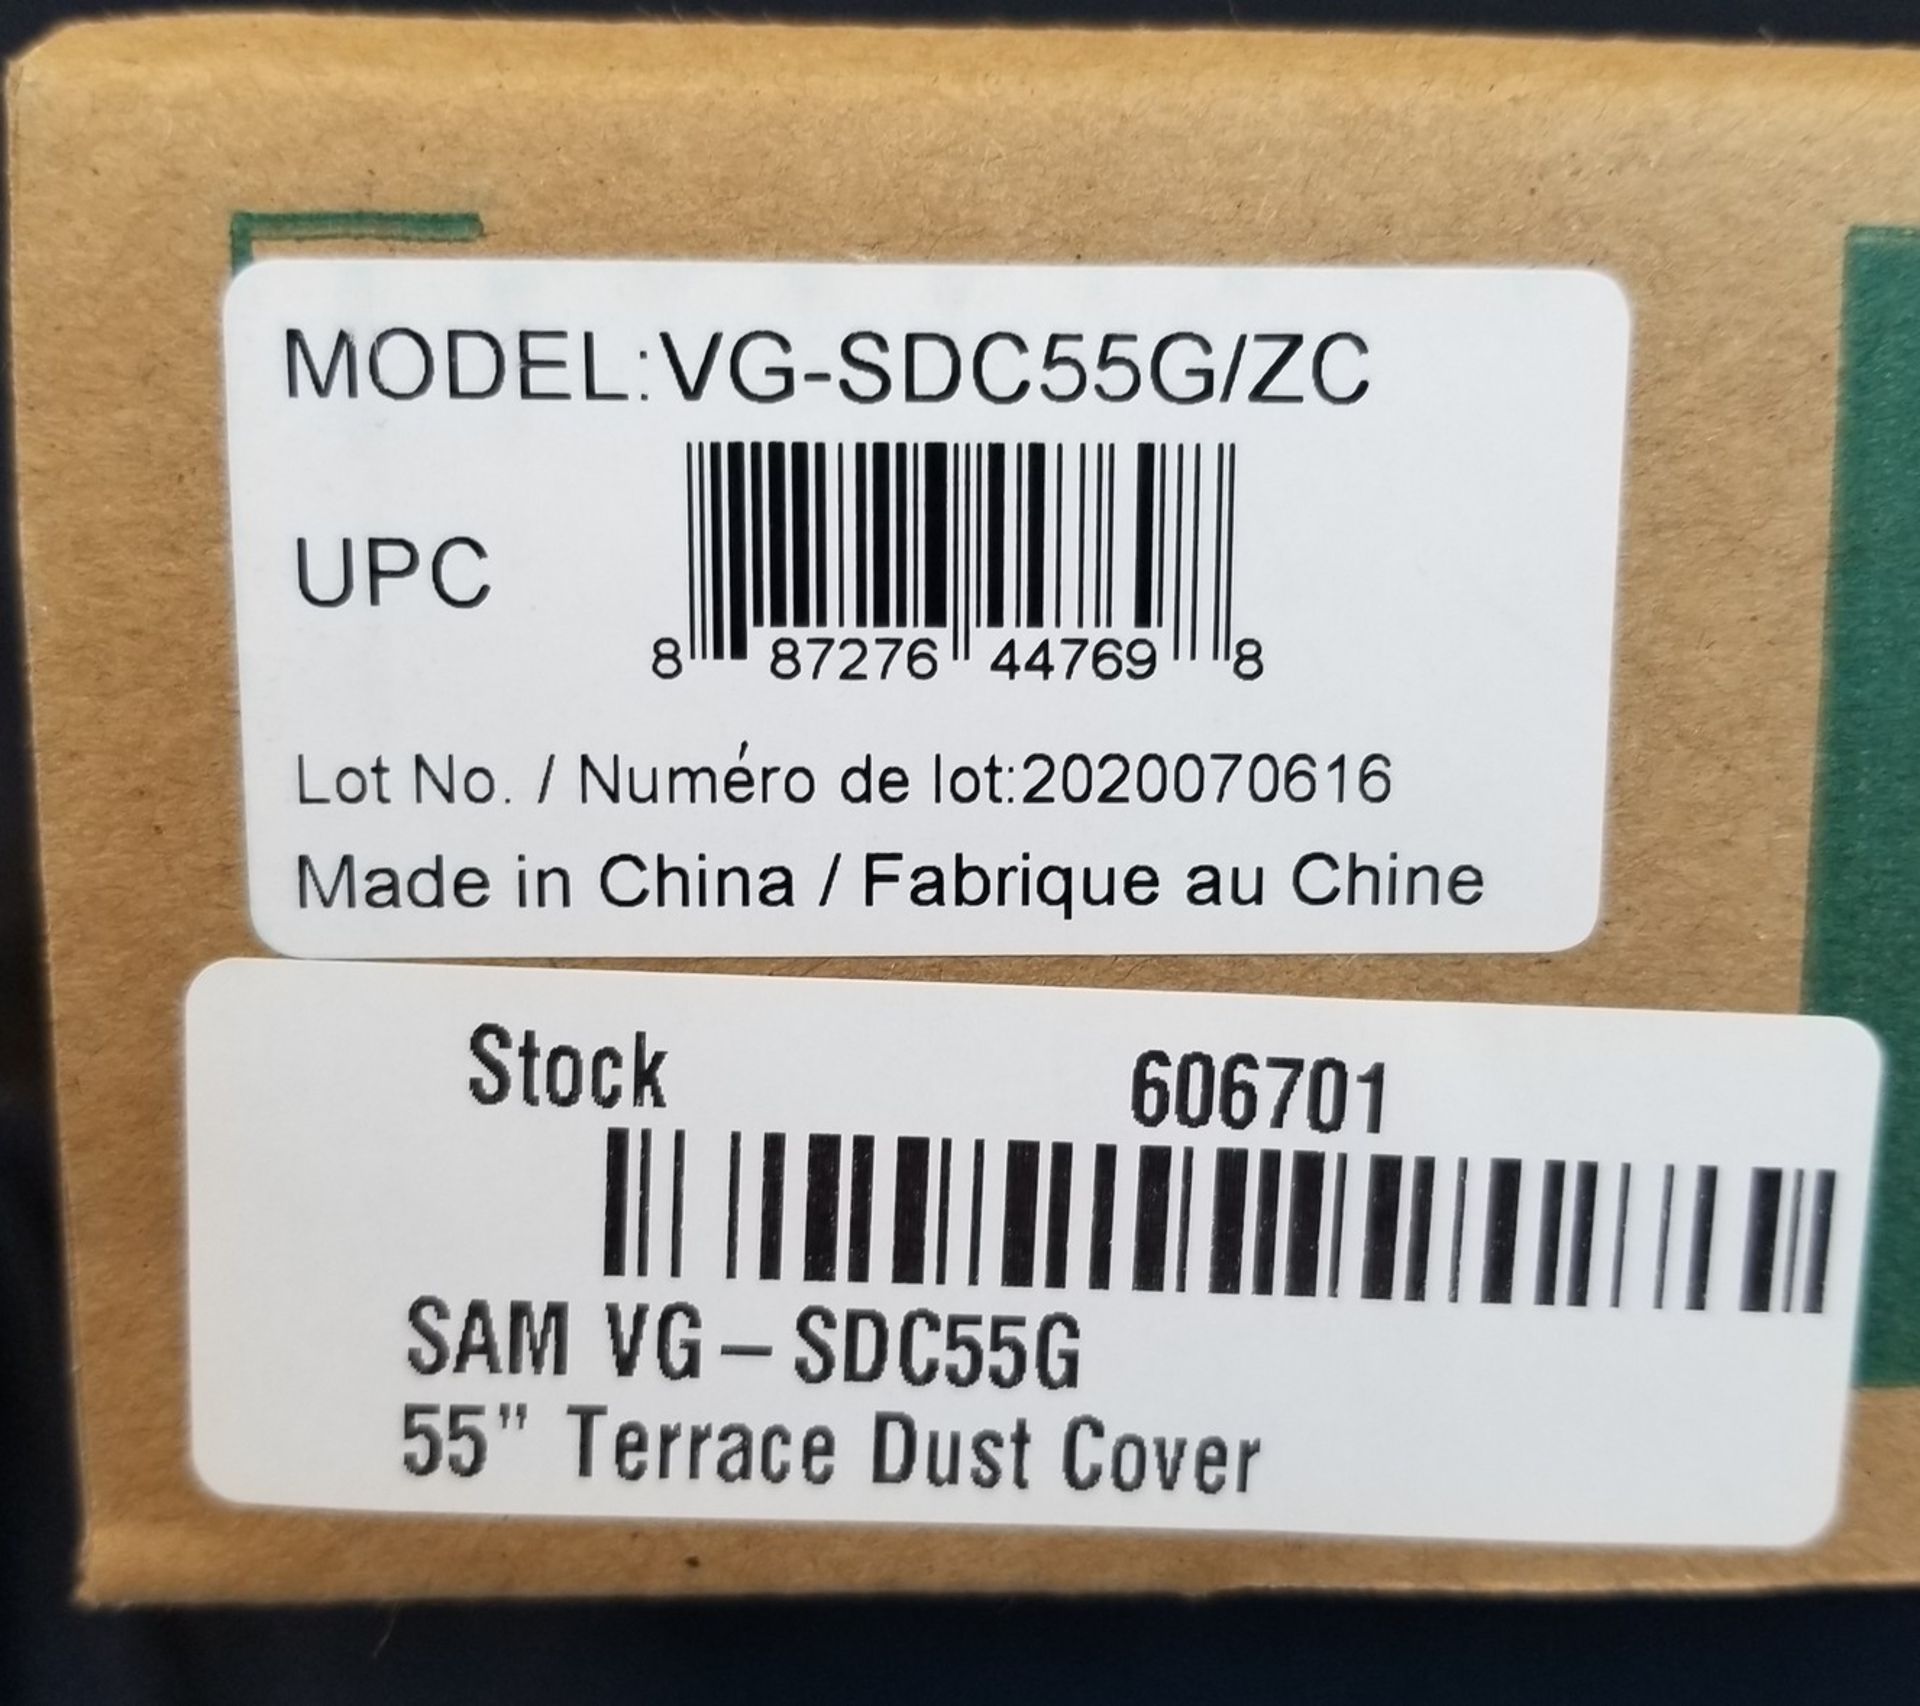 SAMSUNG, THE TERRACE DUST COVER 55", MODEL: VG-SDC55G/ZC - (BNIB) MSRP $209 (LOCATED IN MISSISSAUGA, - Image 2 of 2